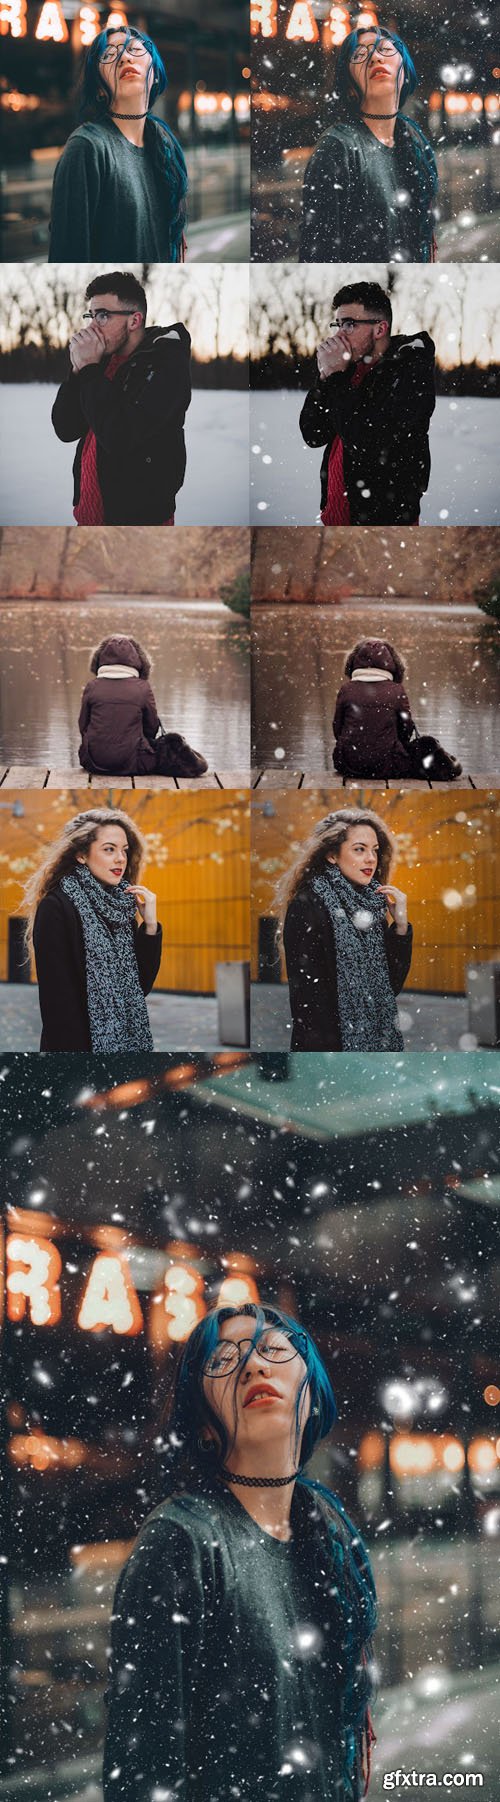 Cool Realistic Falling Snow Effect for Photoshop Vol.2 + Tutorial